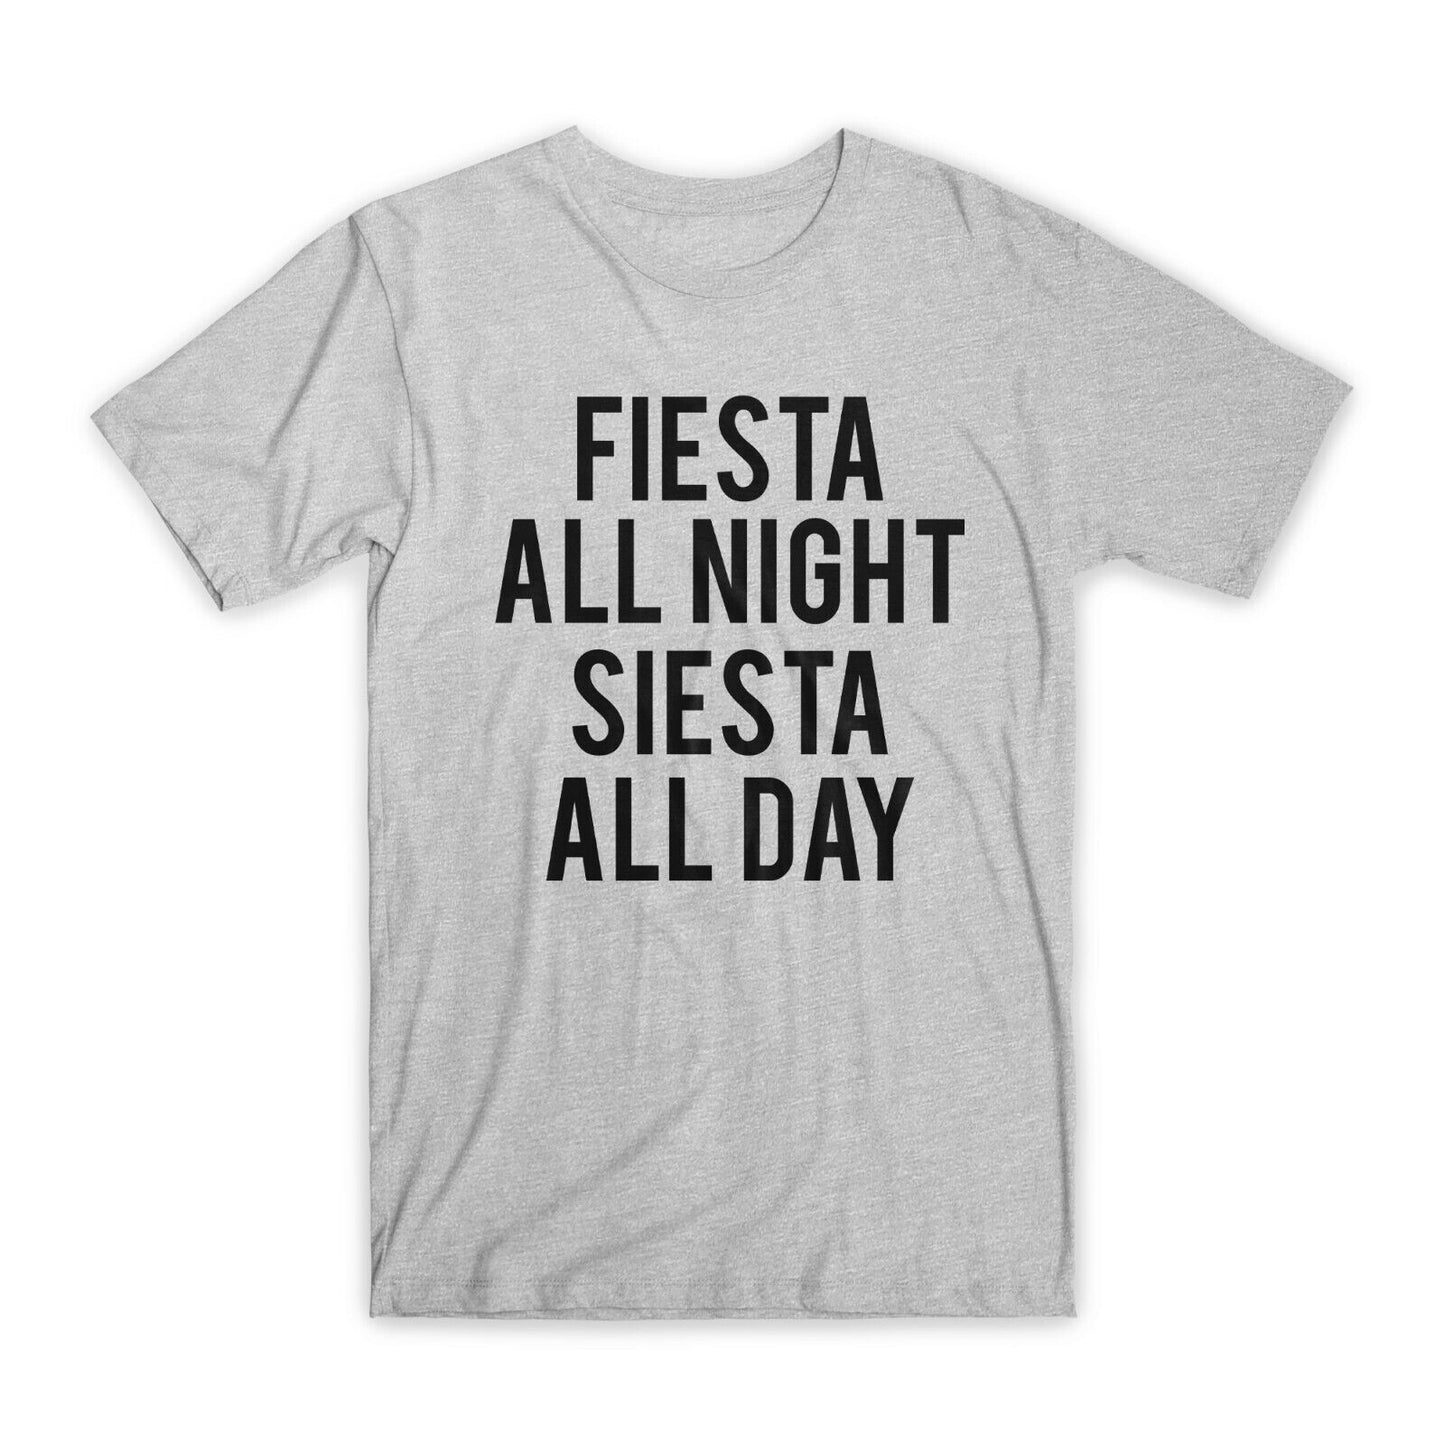 Fiesta All Night Siesta All Day T-Shirt Premium Soft Cotton Funny Tees Gift NEW